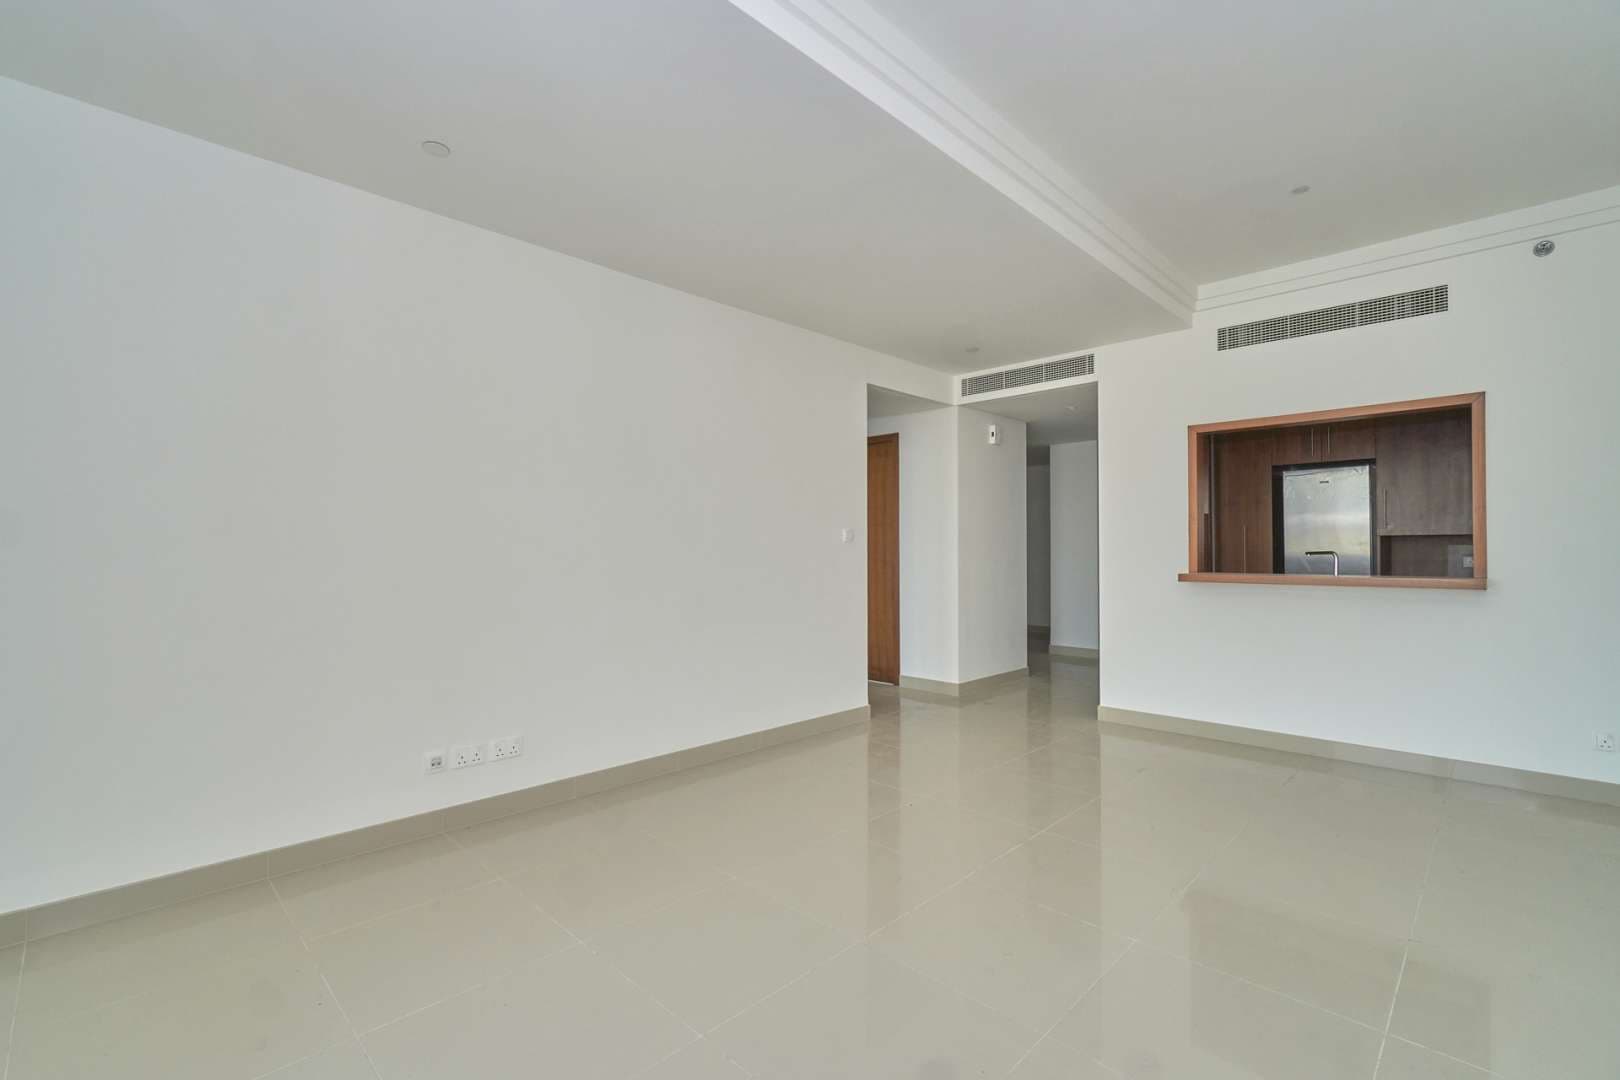 1 Bedroom Apartment For Sale Boulevard Point Lp08214 160961a1f9a2920.jpg